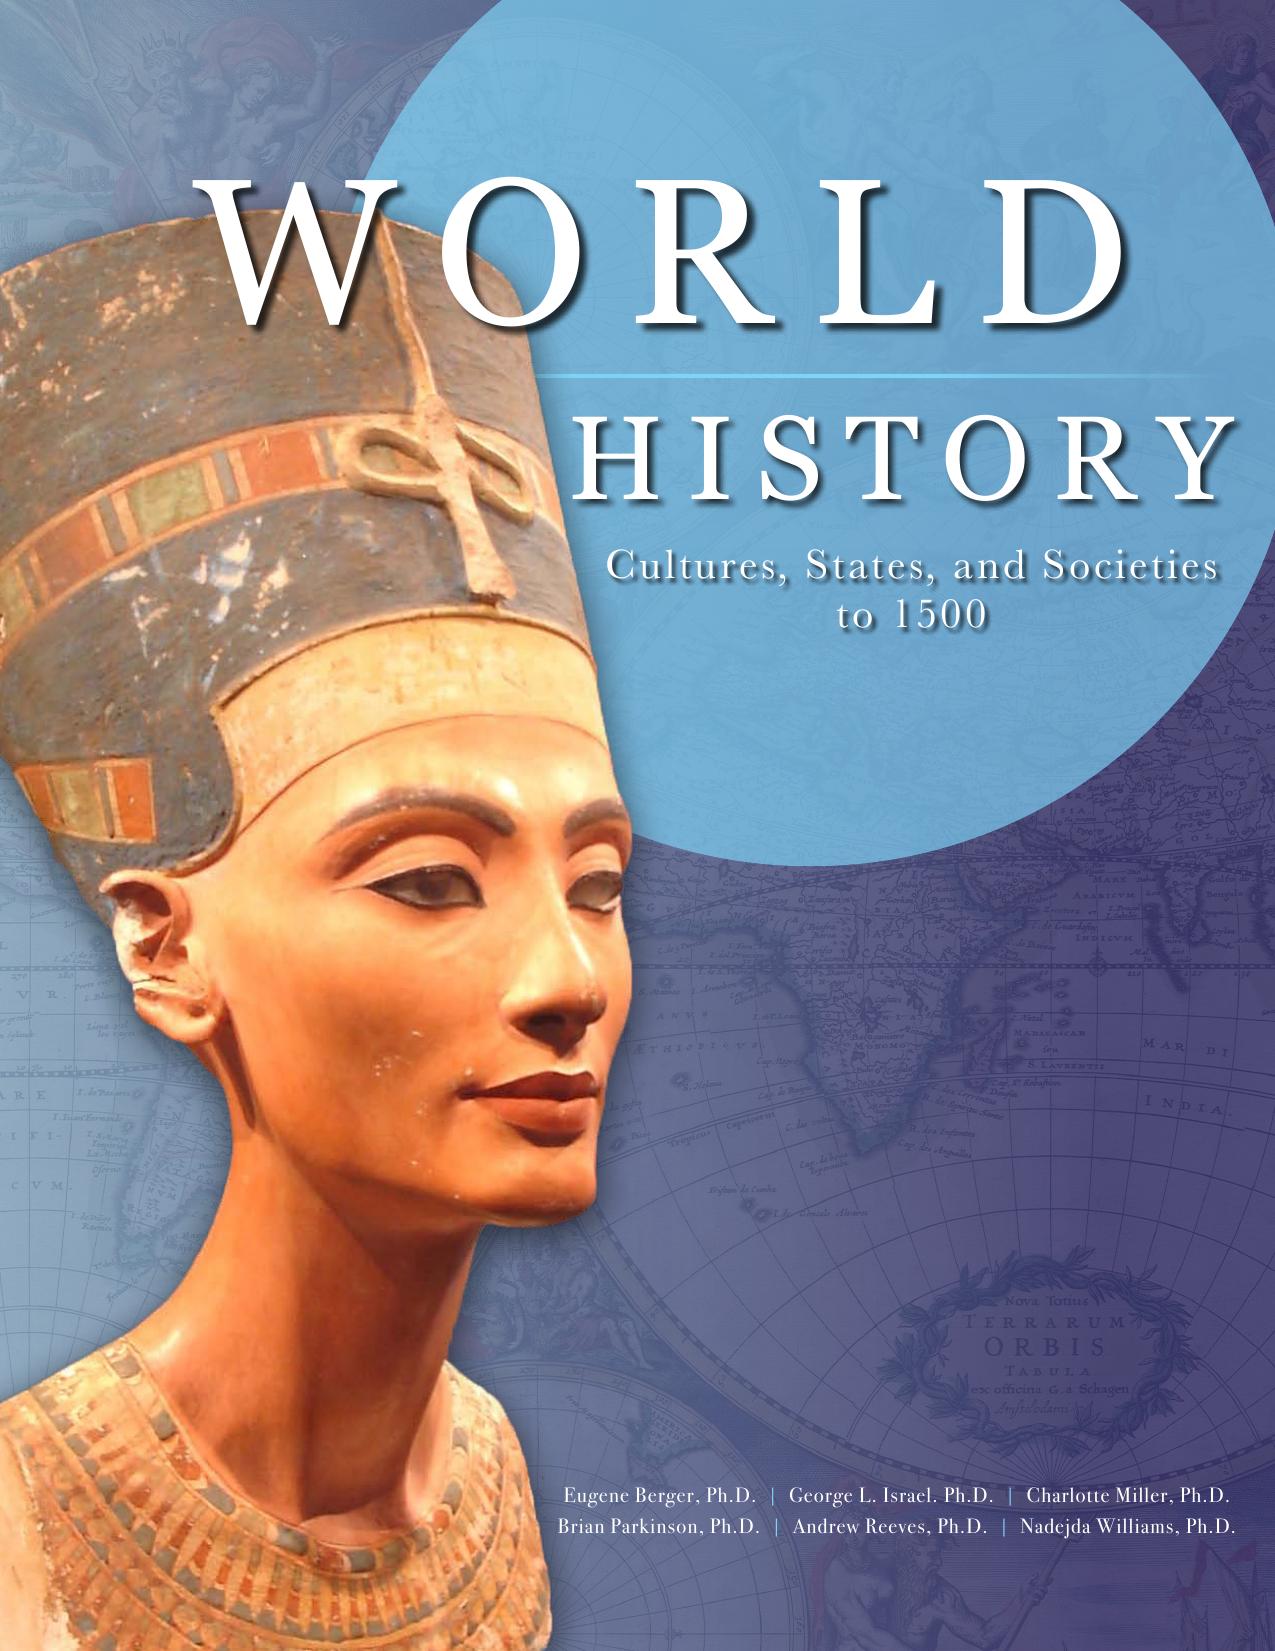 World History: Cultures, States, and Societies to 1500 by unknow